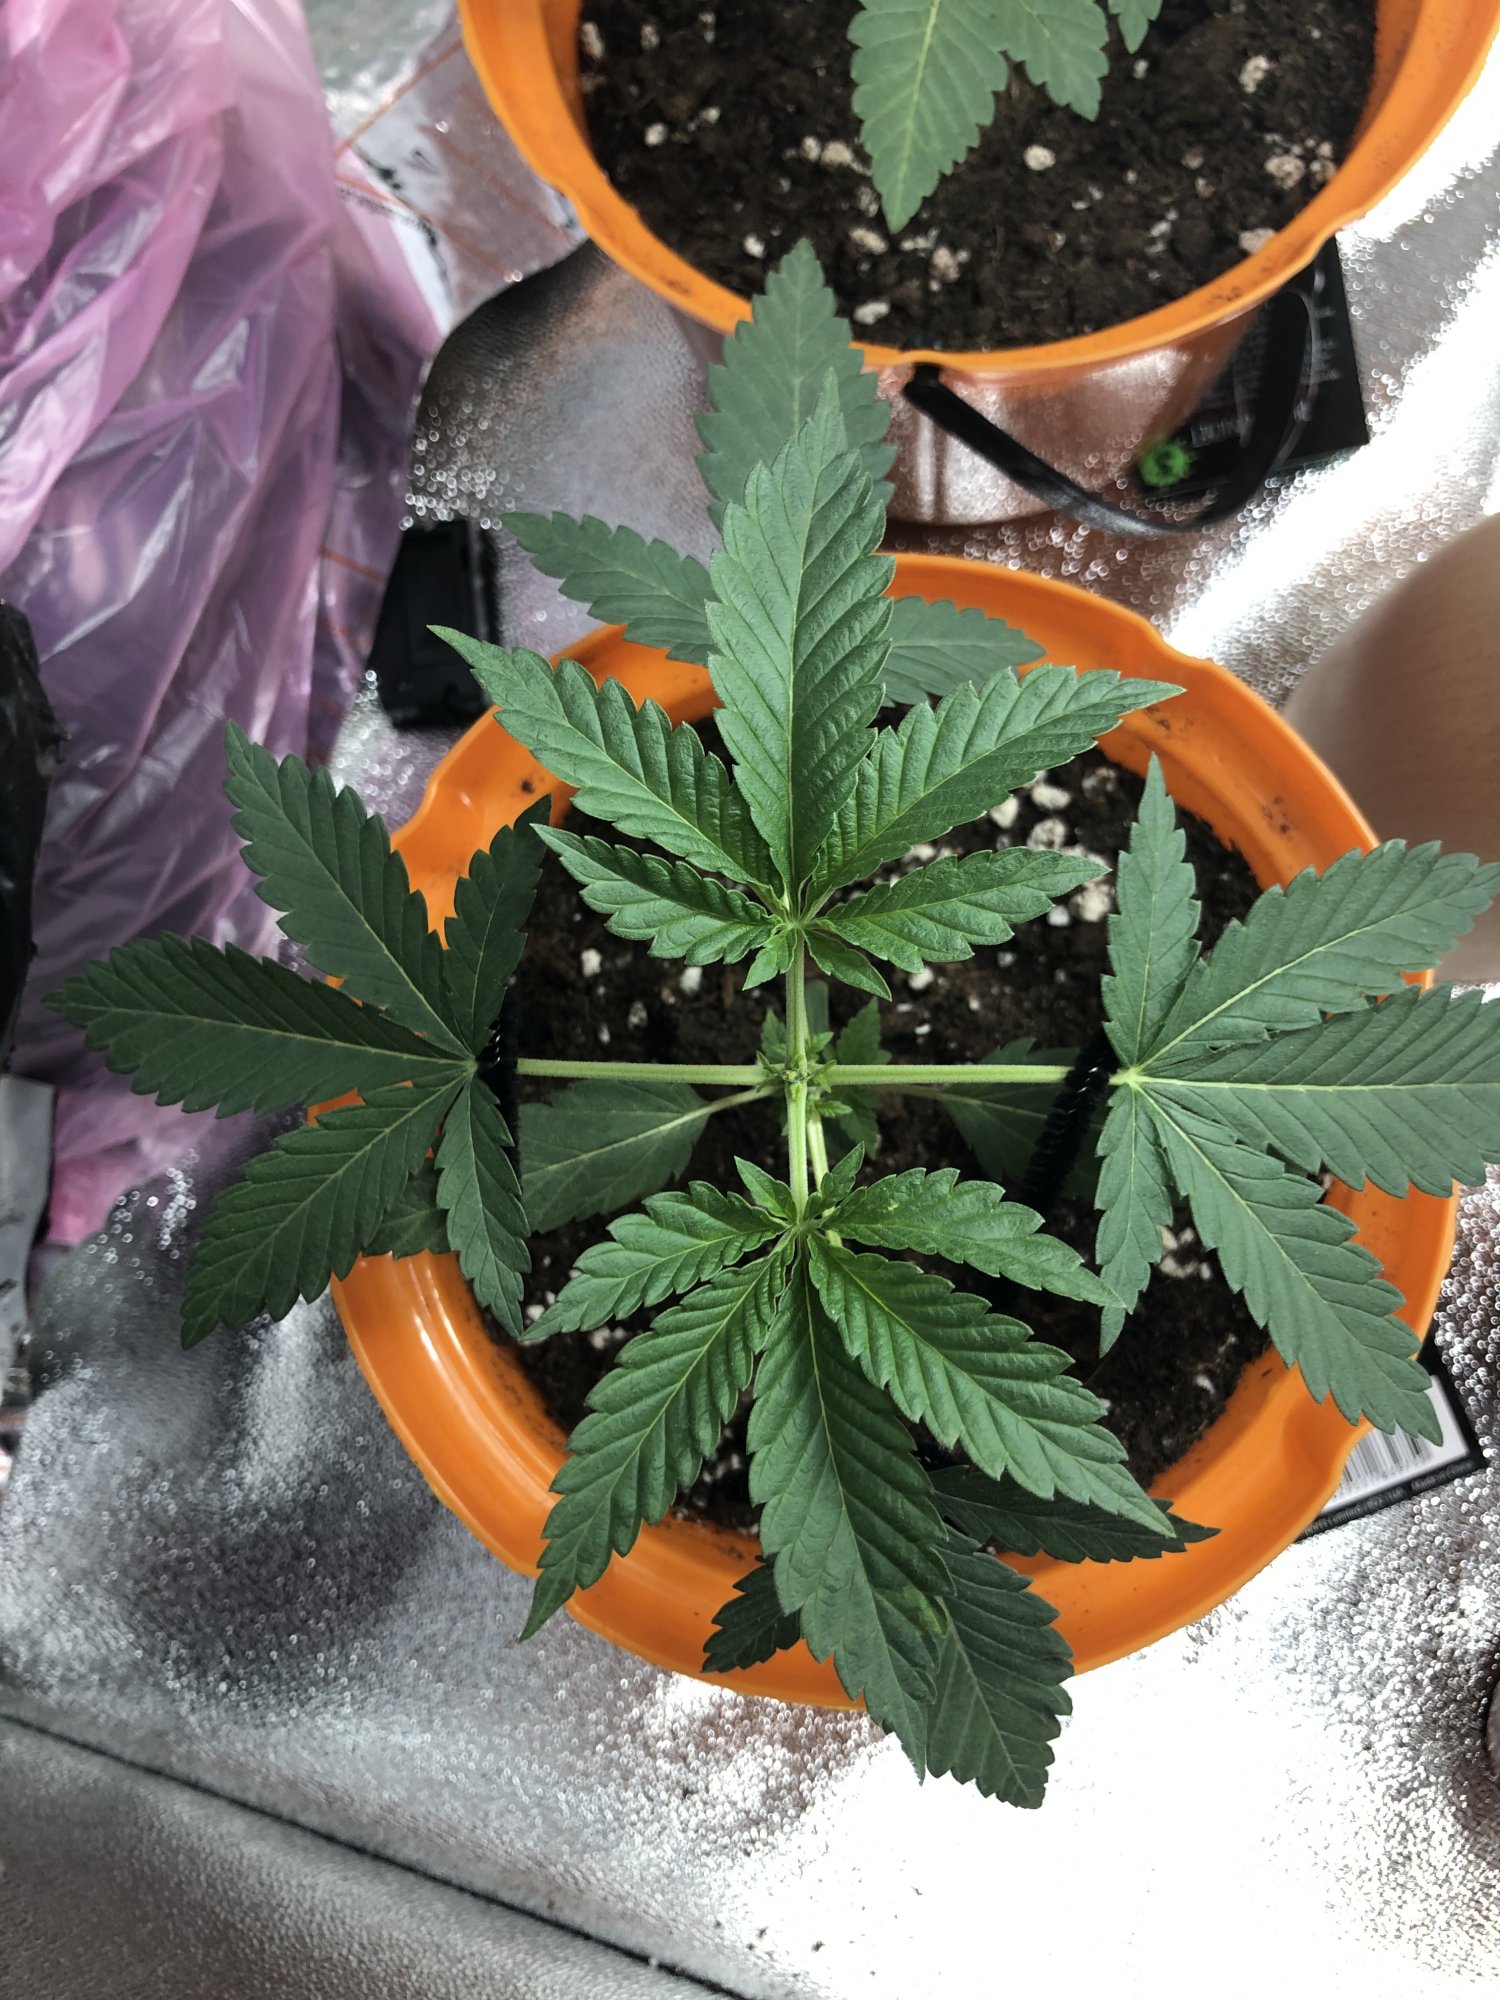 Whats going on with this plant 2